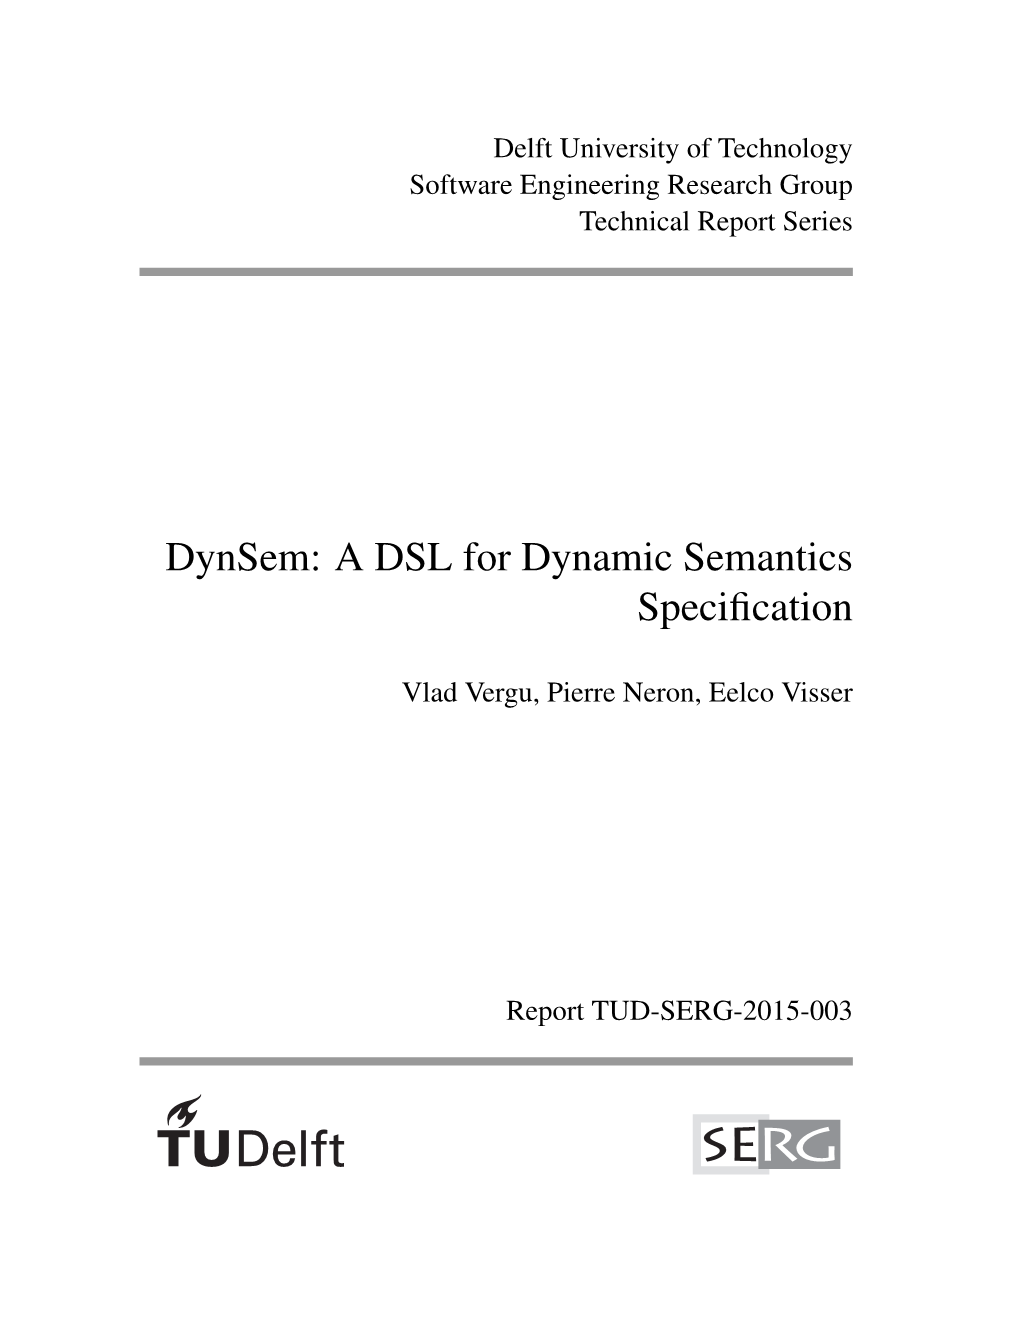 A DSL for Dynamic Semantics Specification}, Year = {2015}}